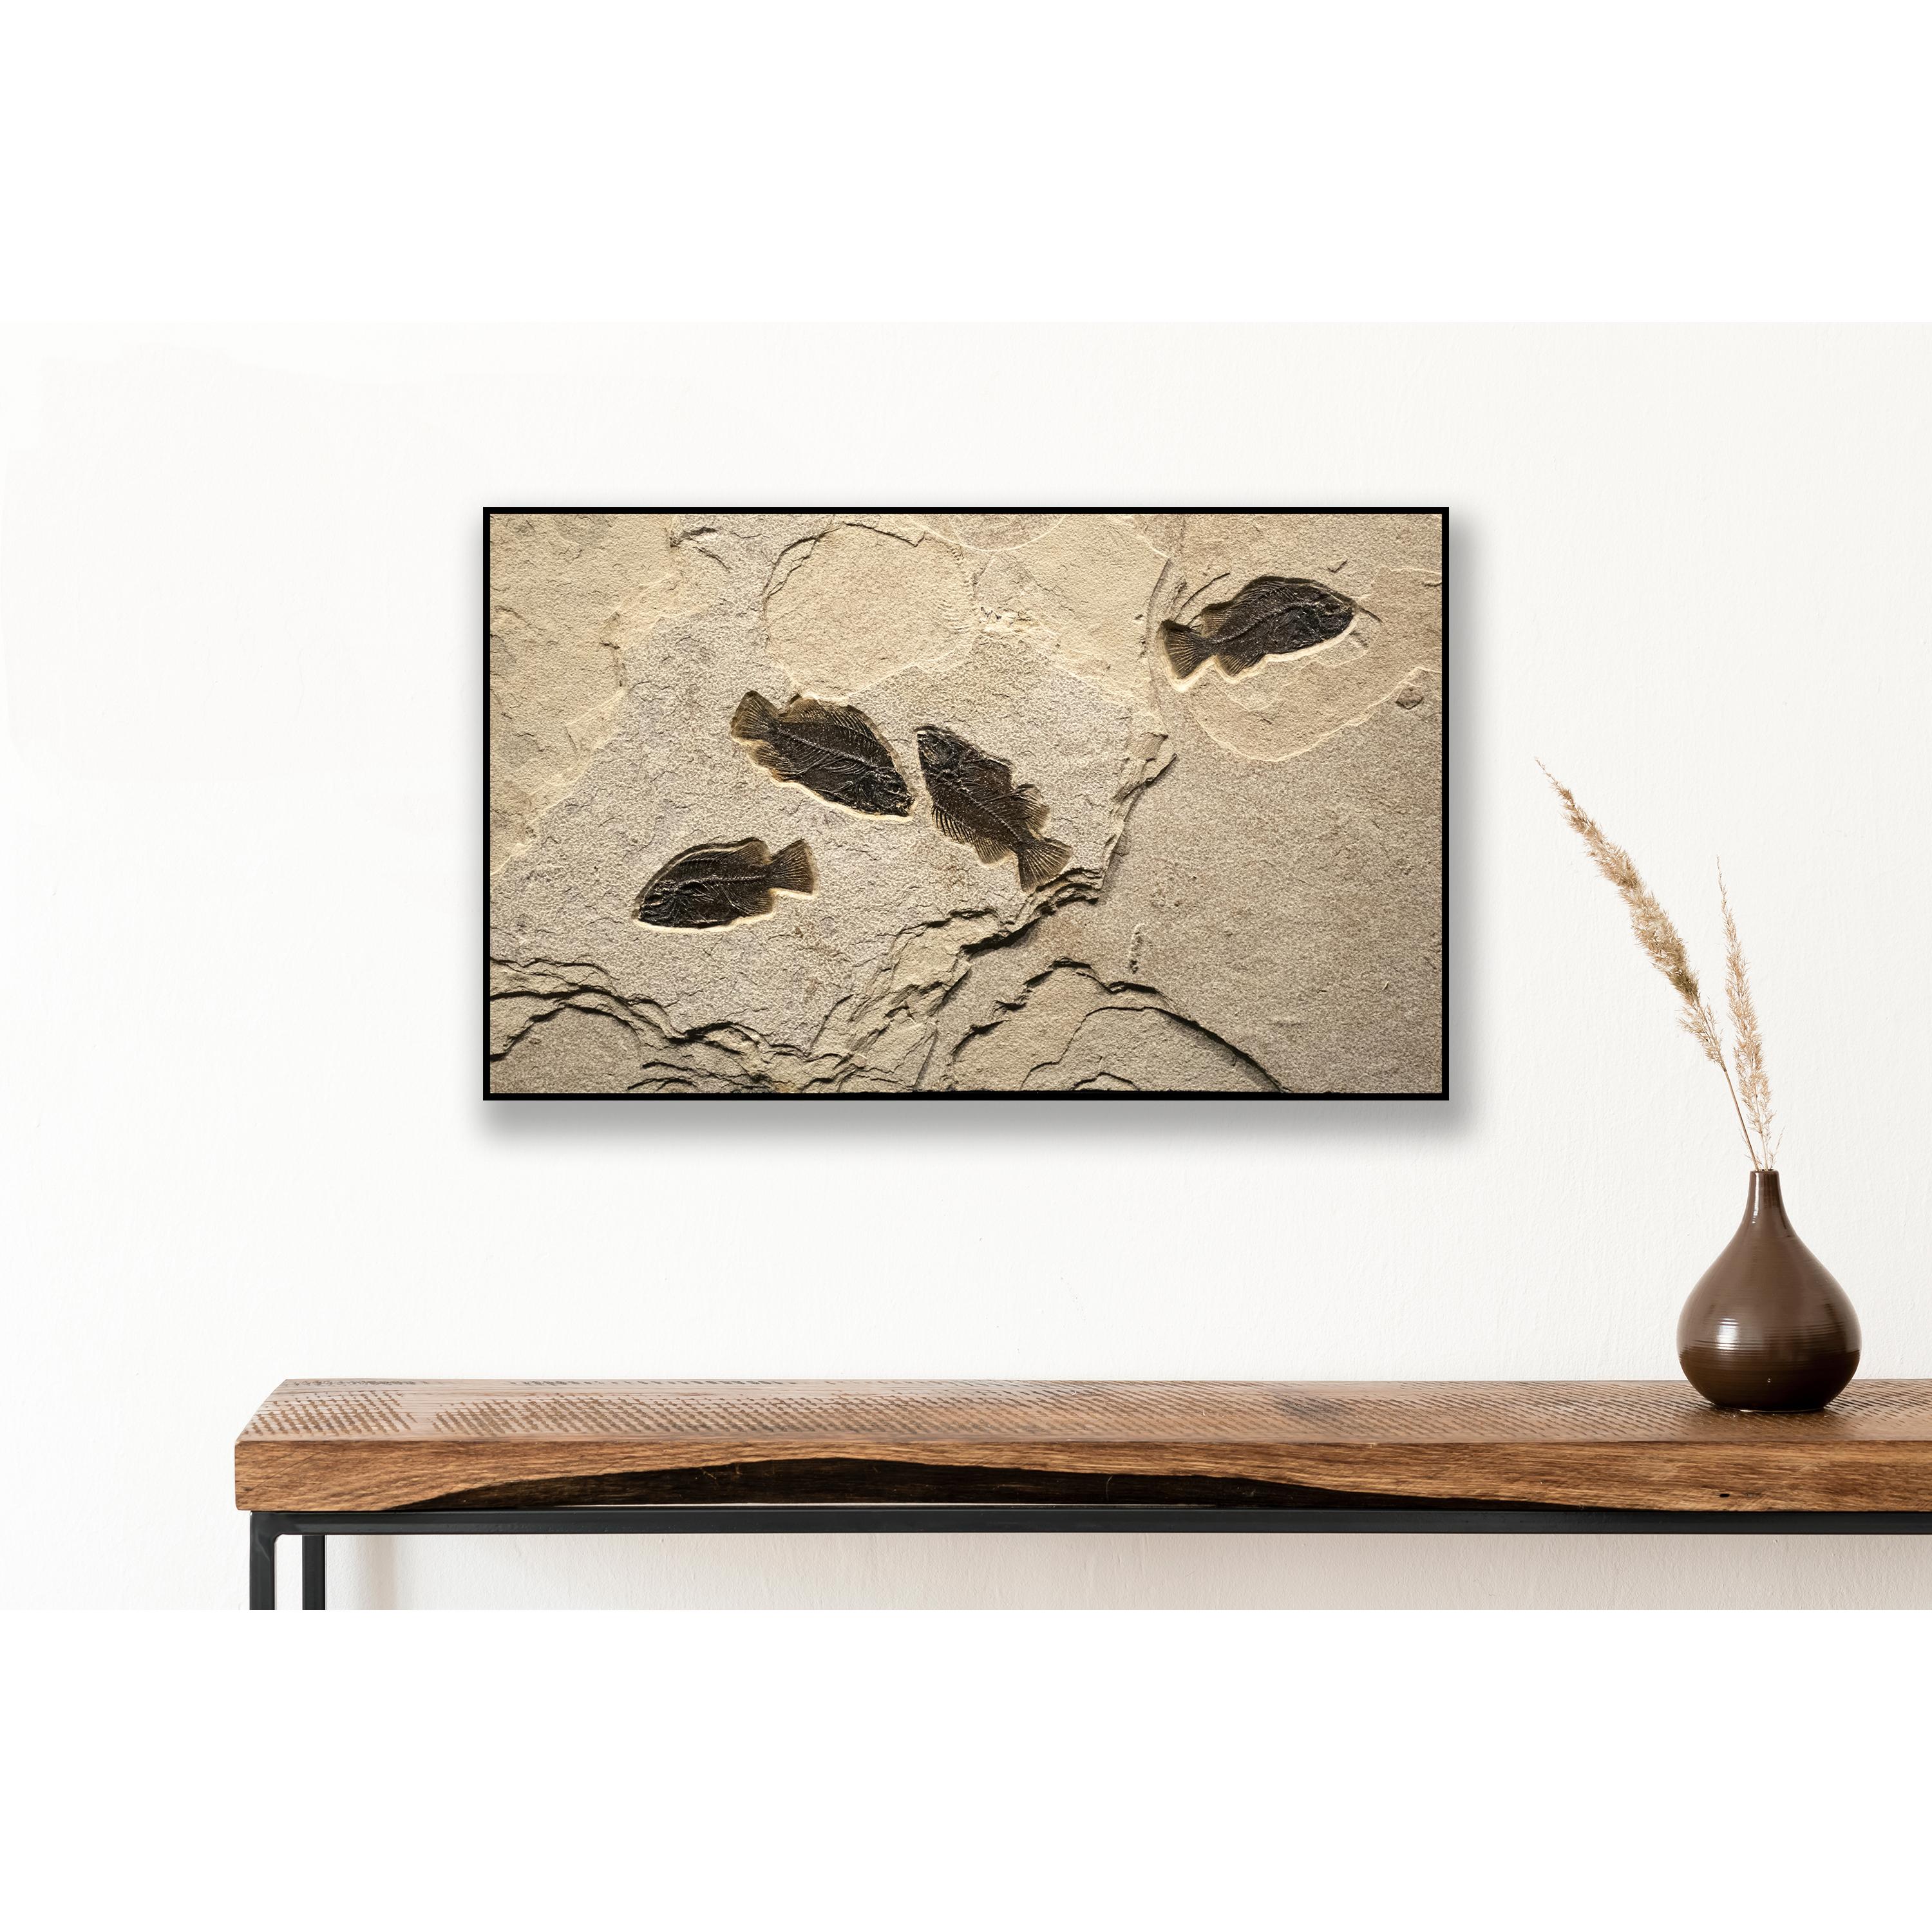 This exquisite fossil mural features four Cockerellites liops (formerly known as Priscacara), all of which are Eocene era fossils dating back about 50 million years. These ancient fish are forever preserved in a textured matrix of natural,